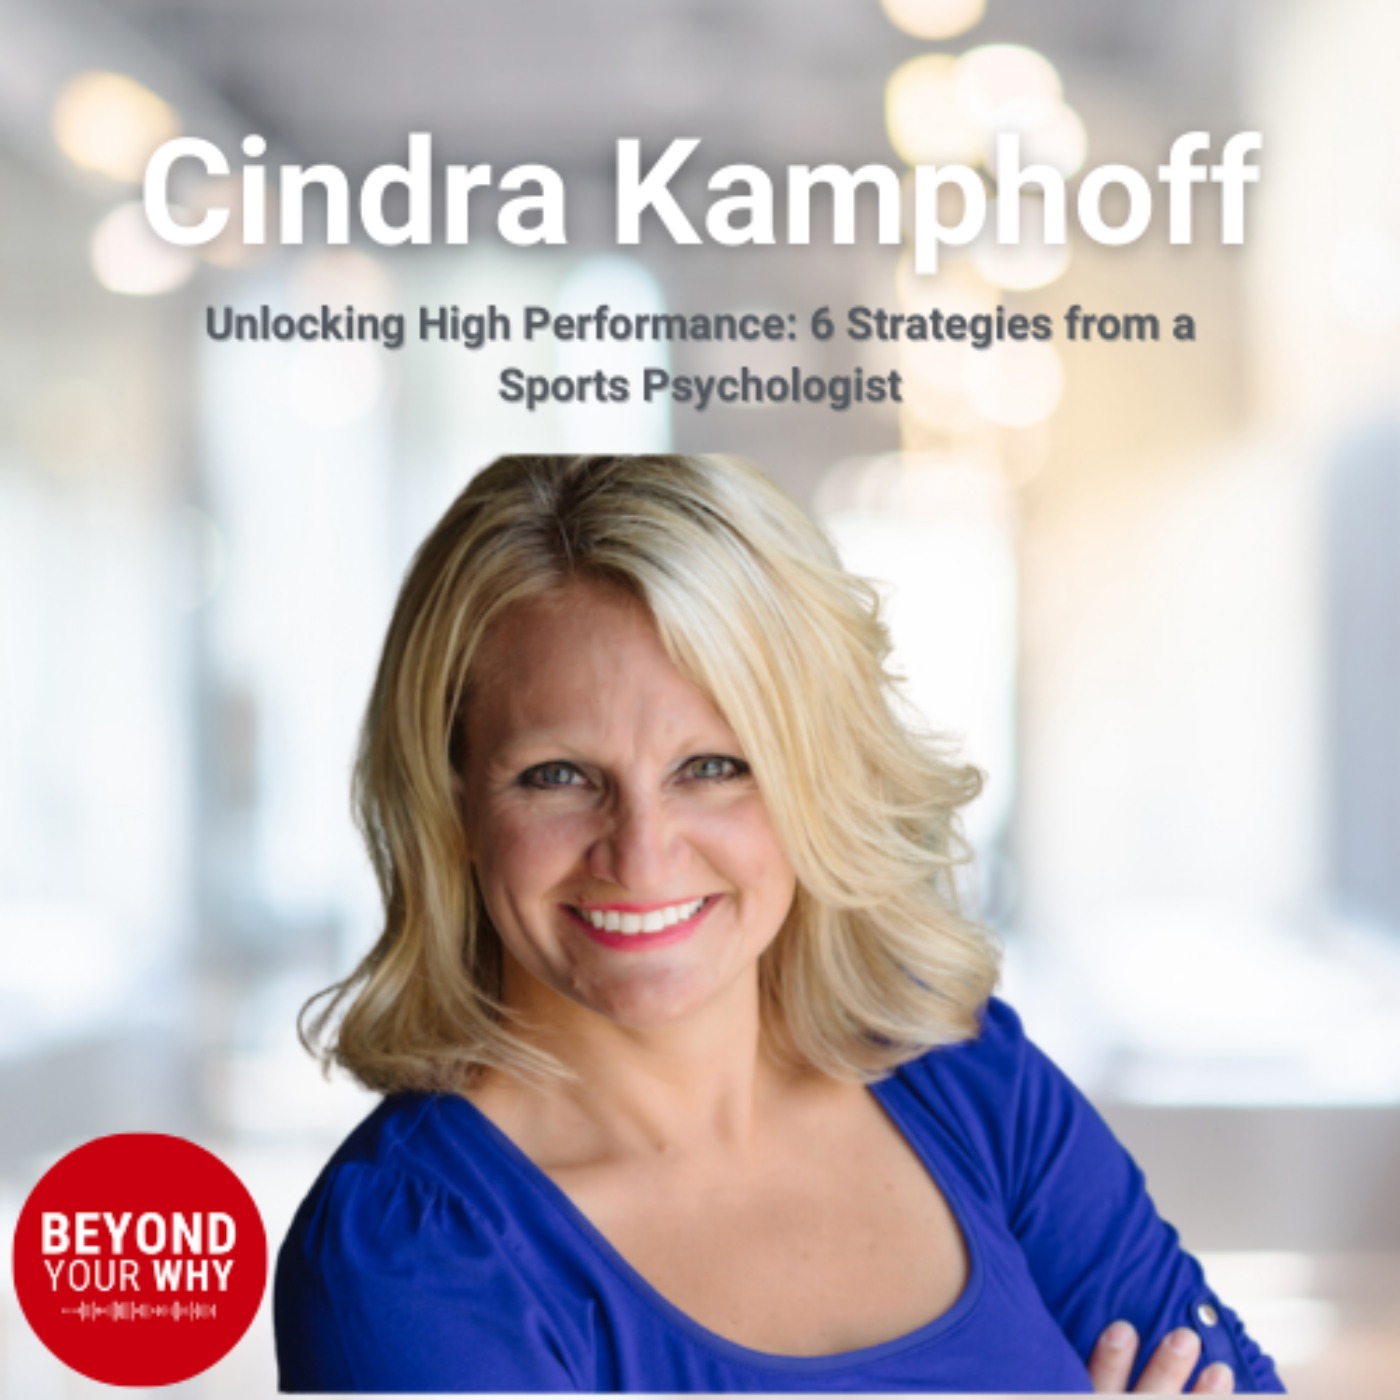 Unlocking High Performance: 6 Strategies from a Sports Psychologist with Cindra Kamphoff